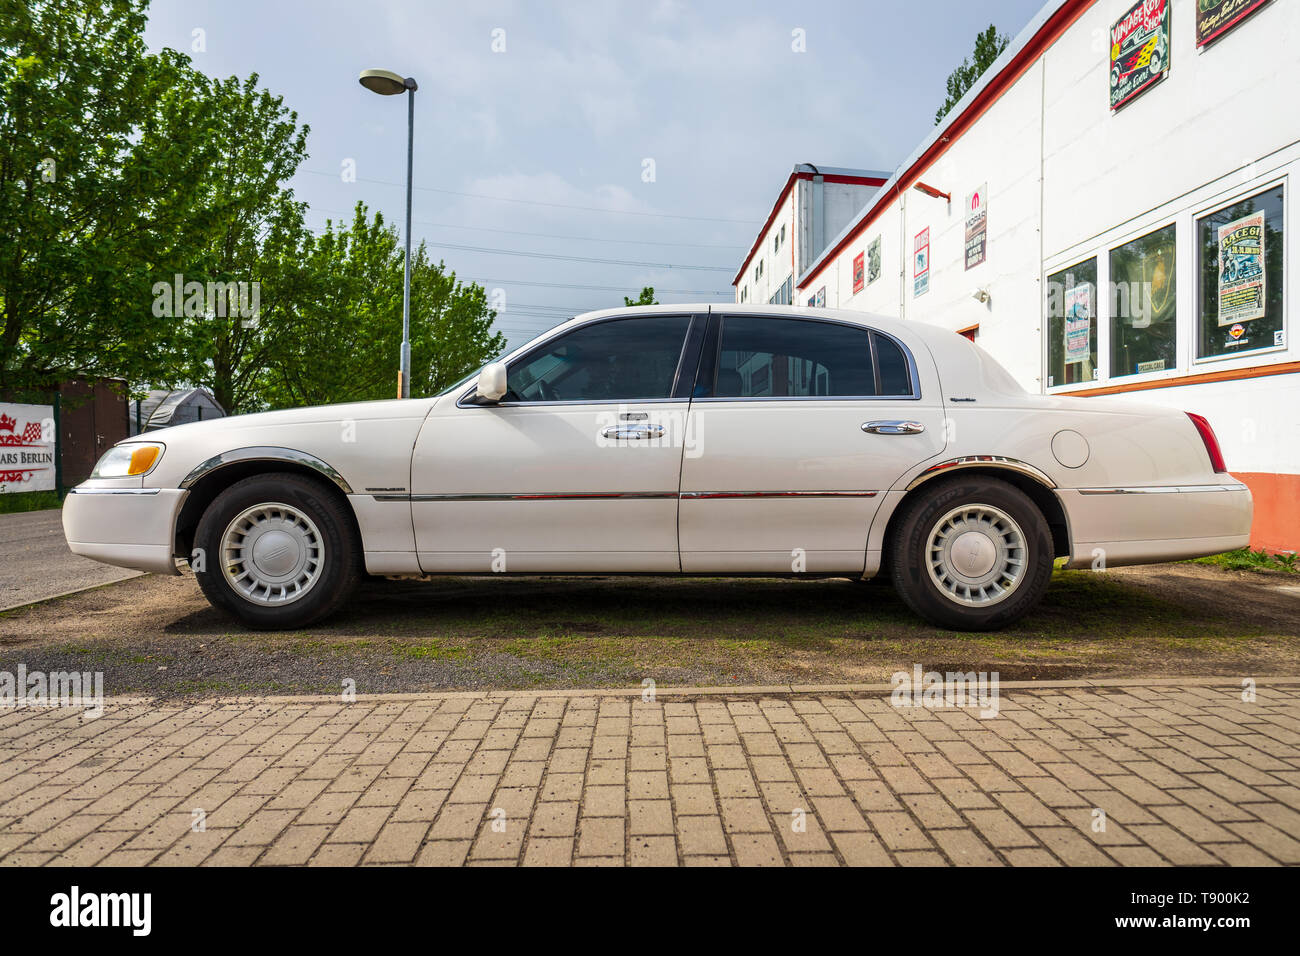 BERLIN - APRIL 27, 2019: Full-size luxury car Lincoln Town Car (third generation) Stock Photo